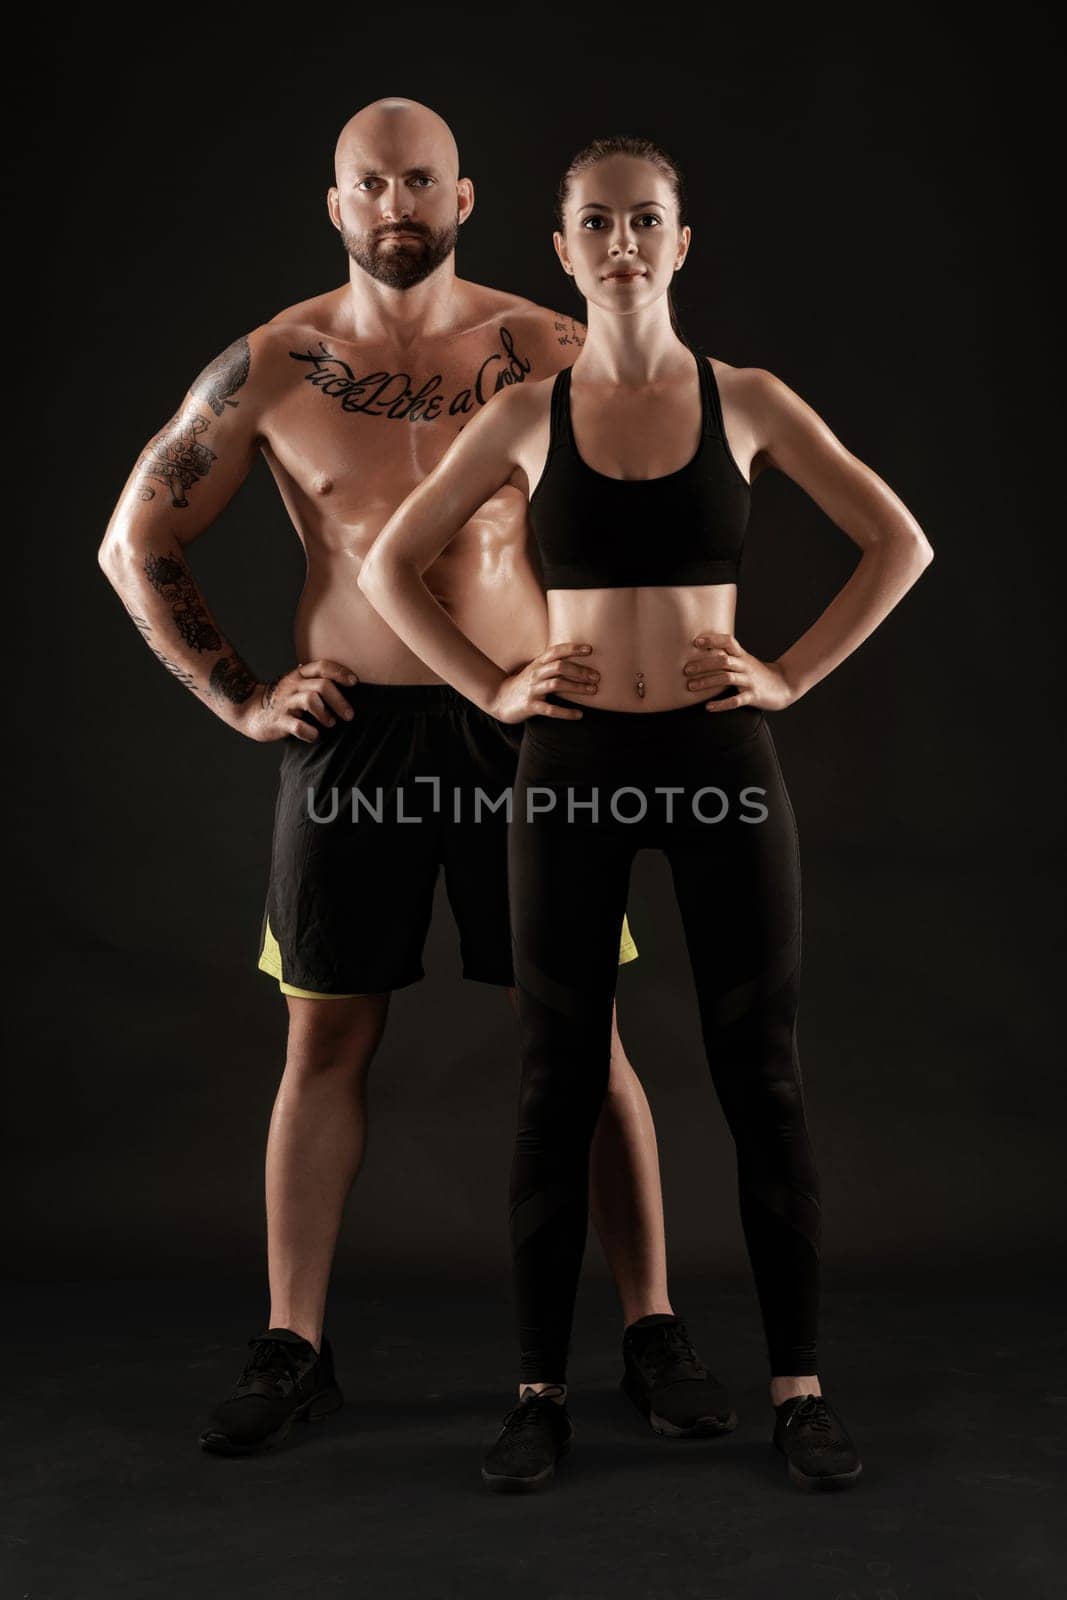 Good-looking bald, tattooed man in black shorts and sneakers with attractive brunette woman in leggings and top are posing on black background and looking at the camera. Fitness couple, chic muscular bodies, gym concept. The love story.